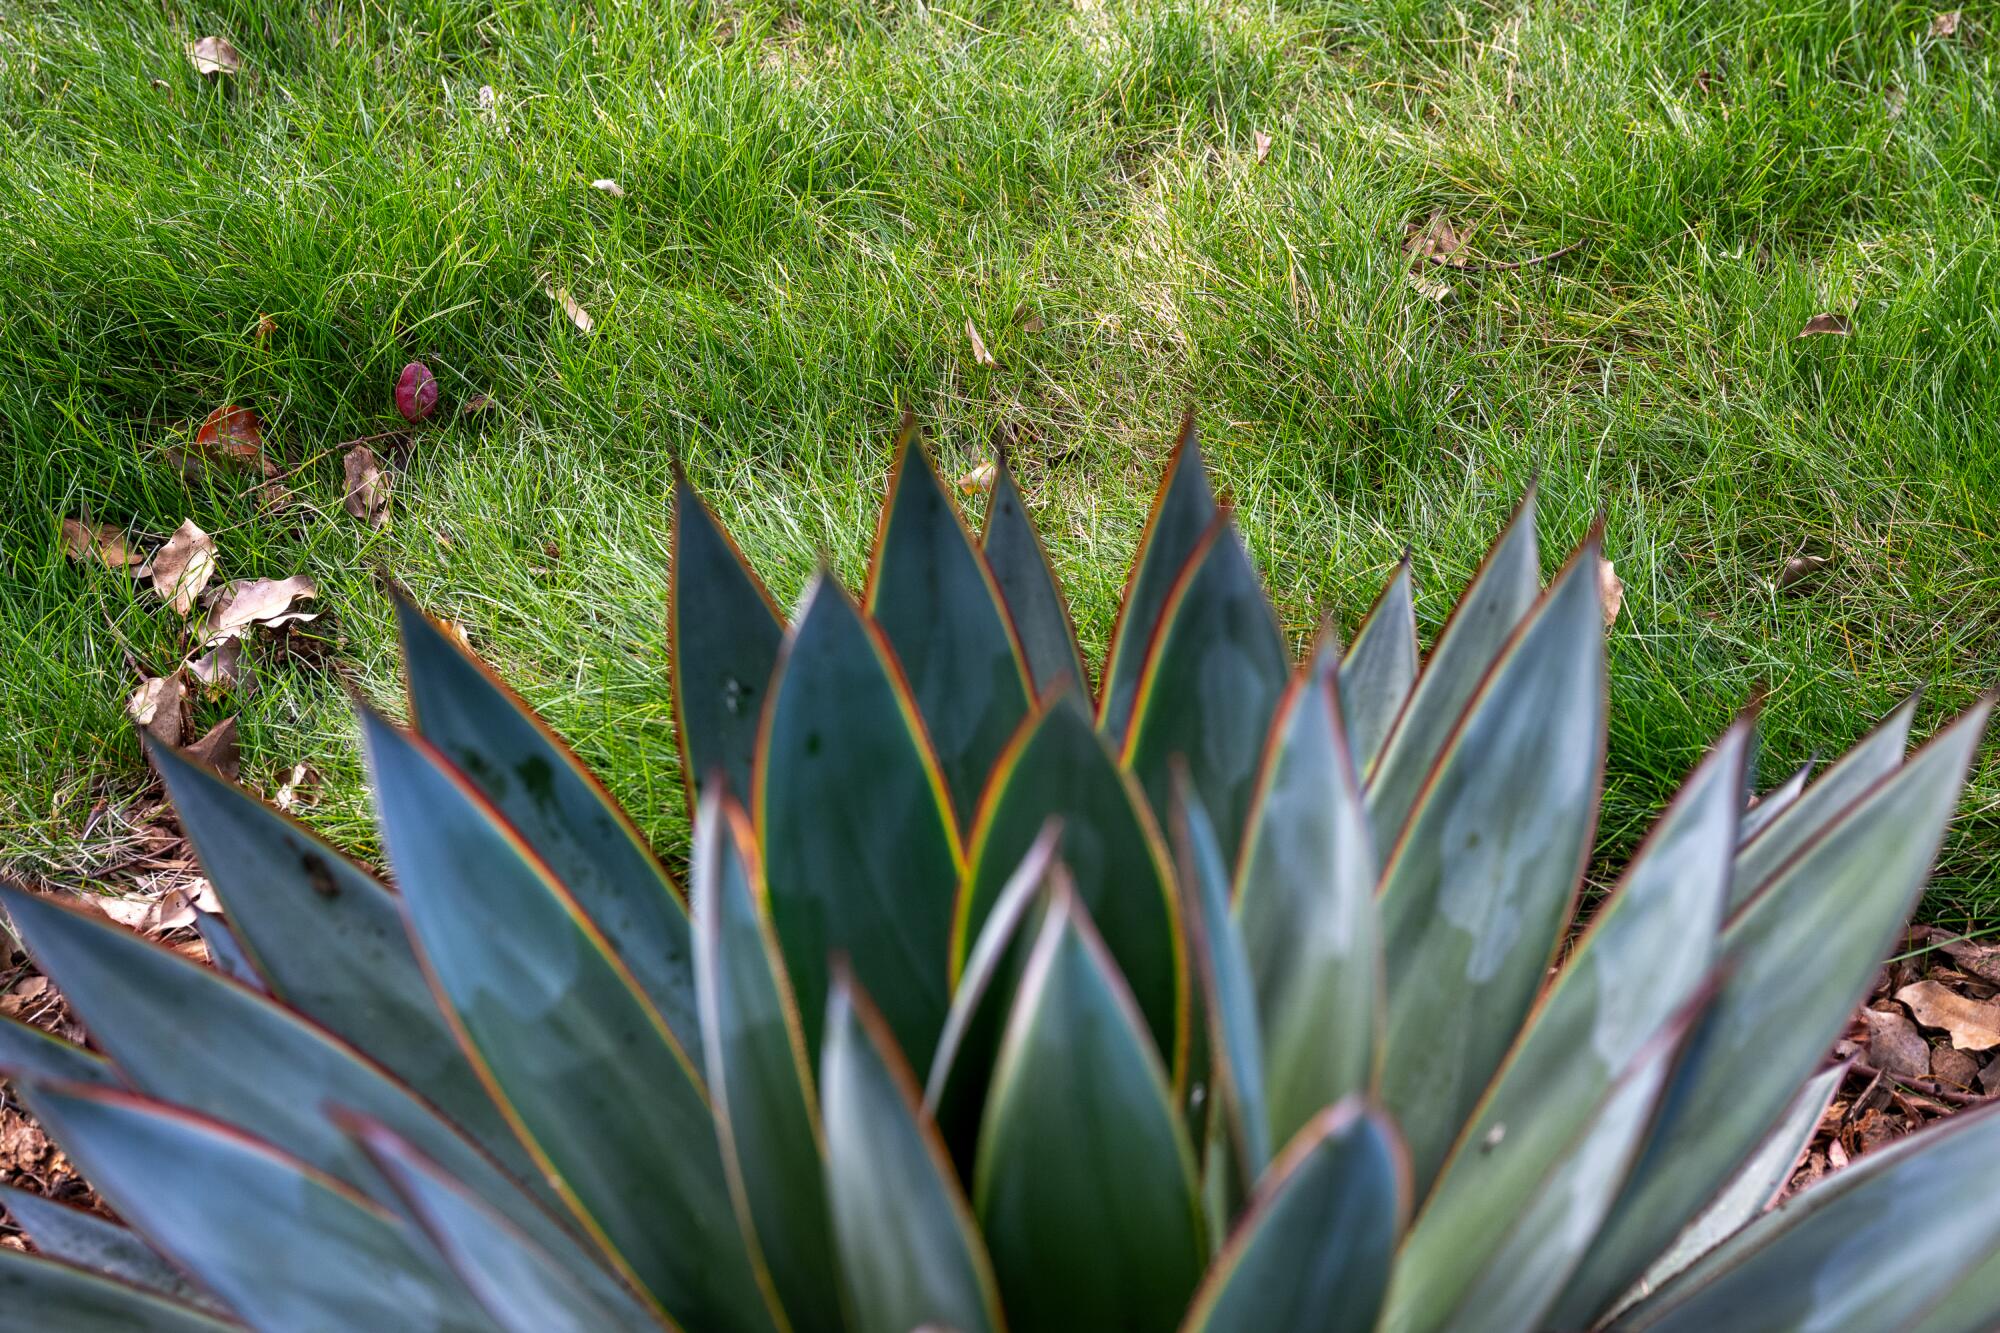 An overhead view of an agave plant in the foreground, and long native grass in the background.